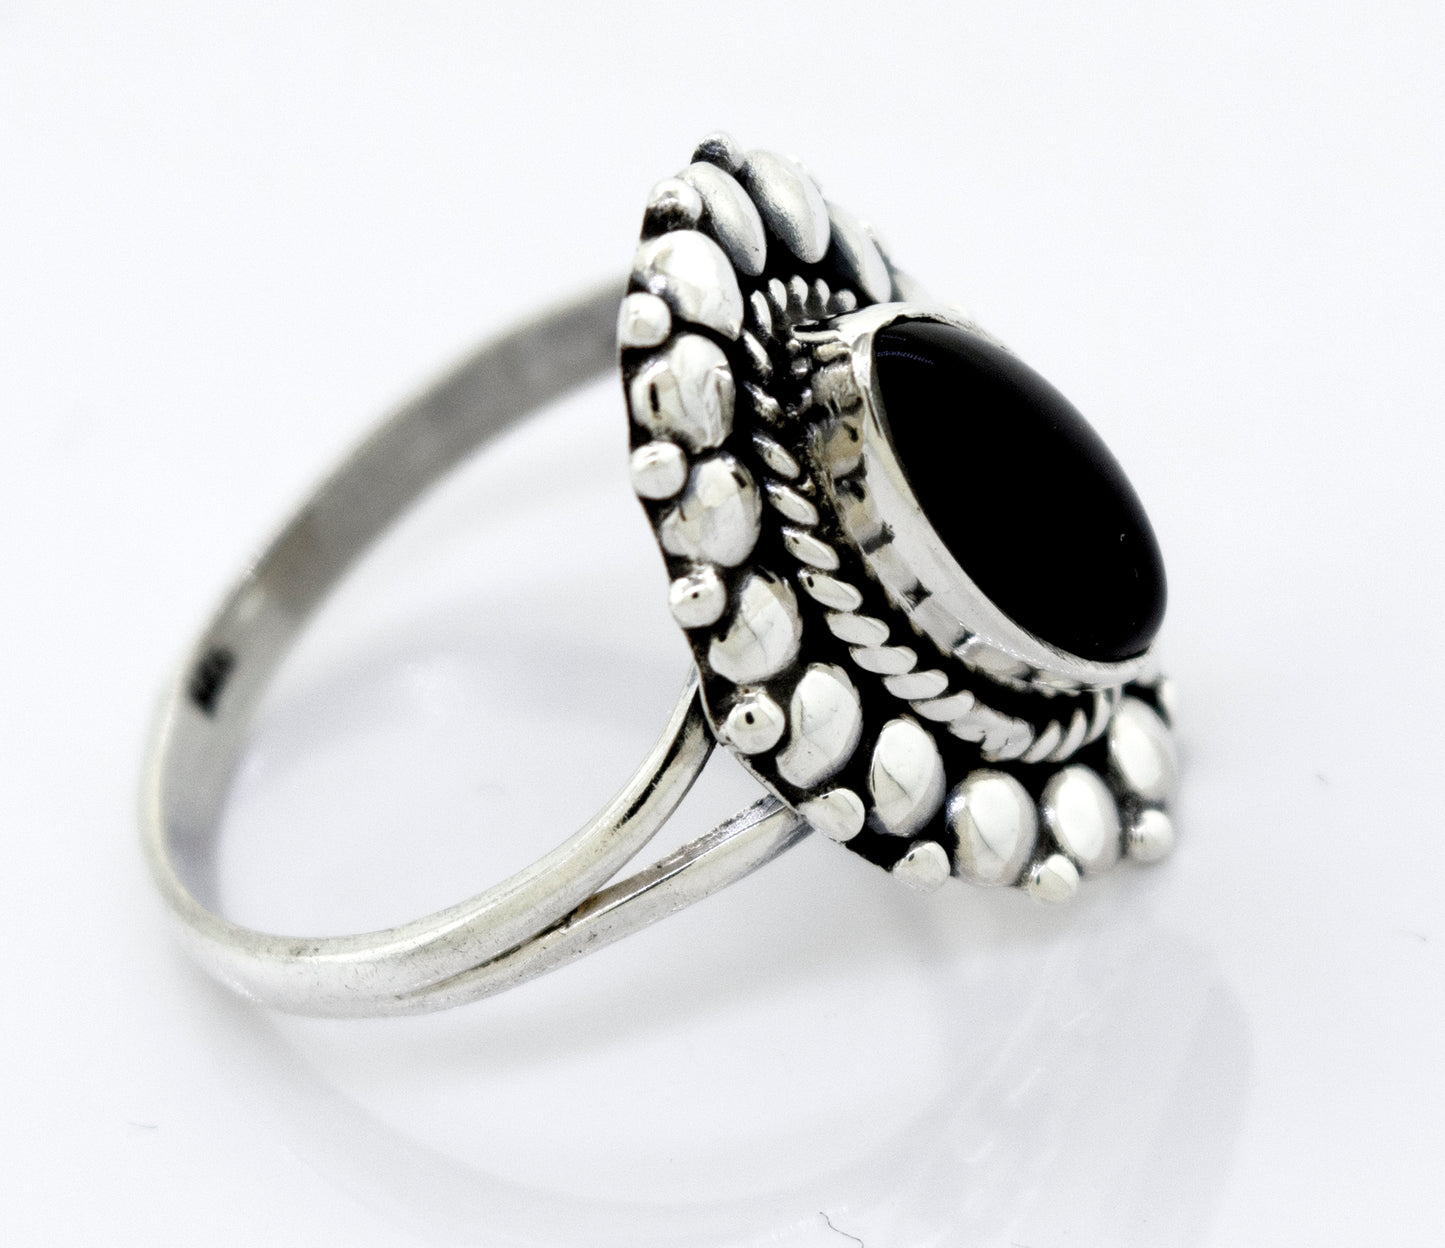 A Marquise Shaped Elegant Onyx Ring with a beautiful onyx stone by Super Silver.